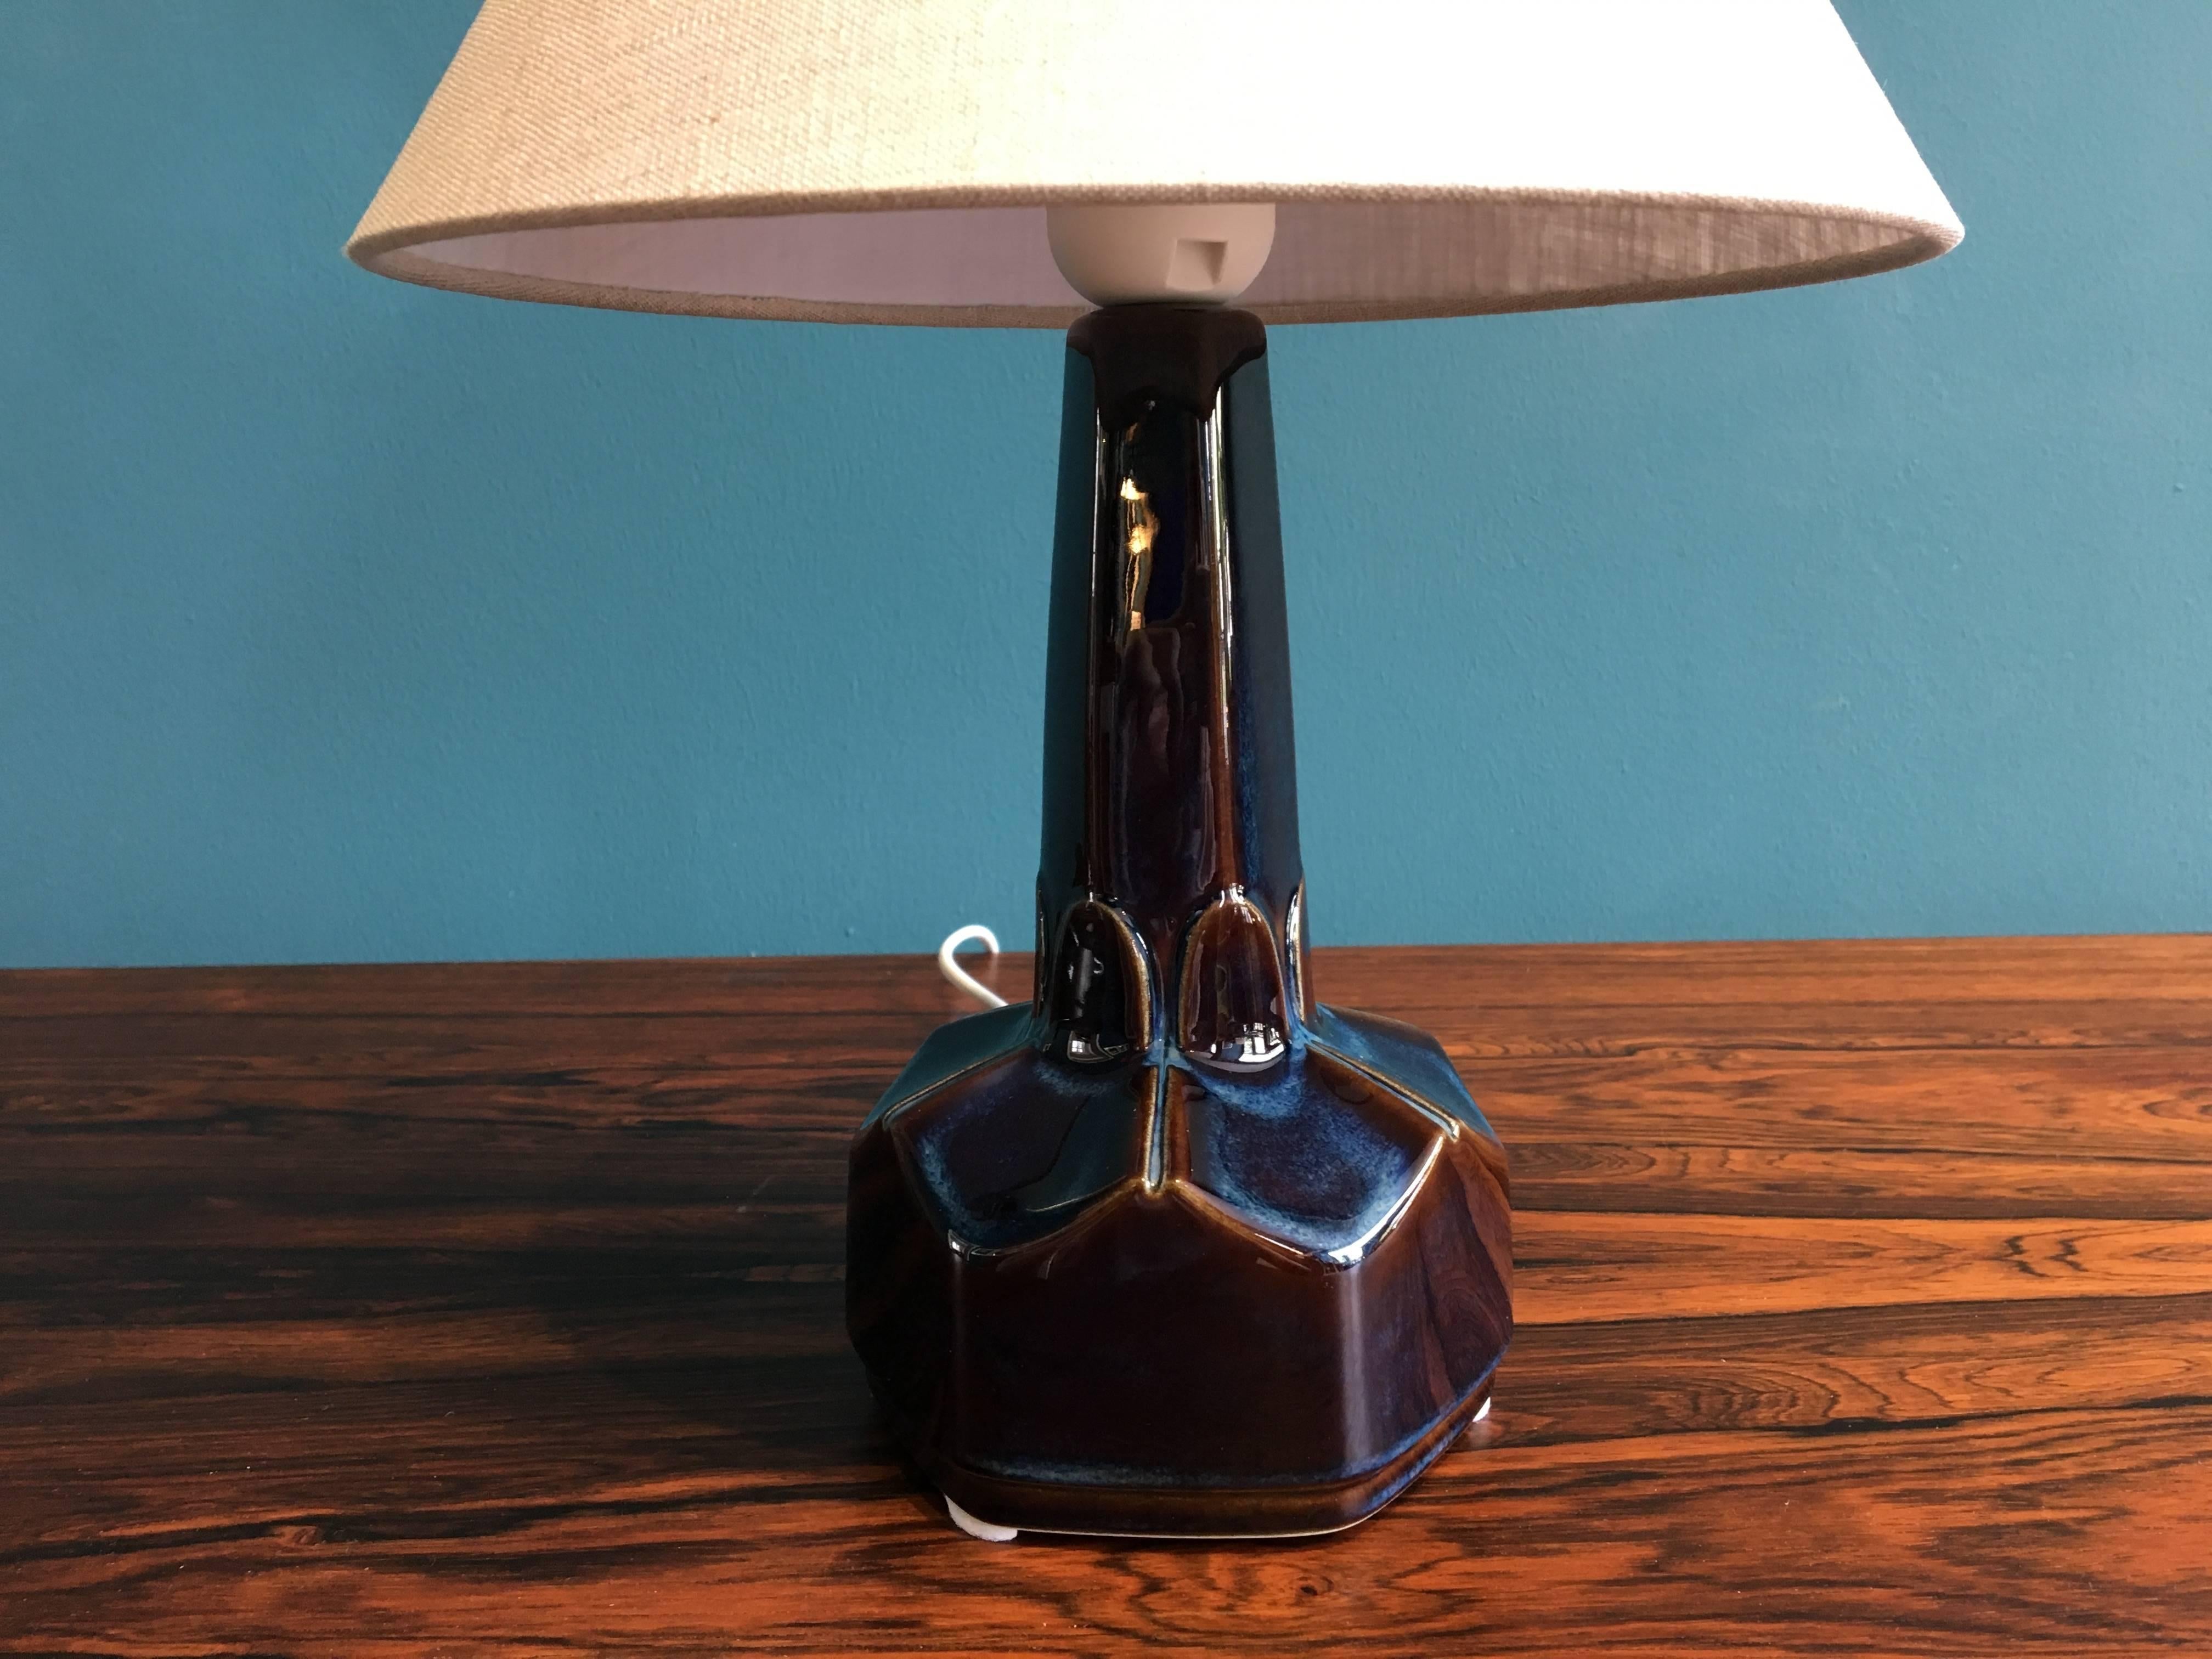 This small ceramic table lamp was designed by Einar Johansen and produced by Soholm Stentoj in Denmark in the 1960s. The lamp has been rewired with switch and has a new socket and shade. New European wiring and plug. Søholm was founded in 1835, in